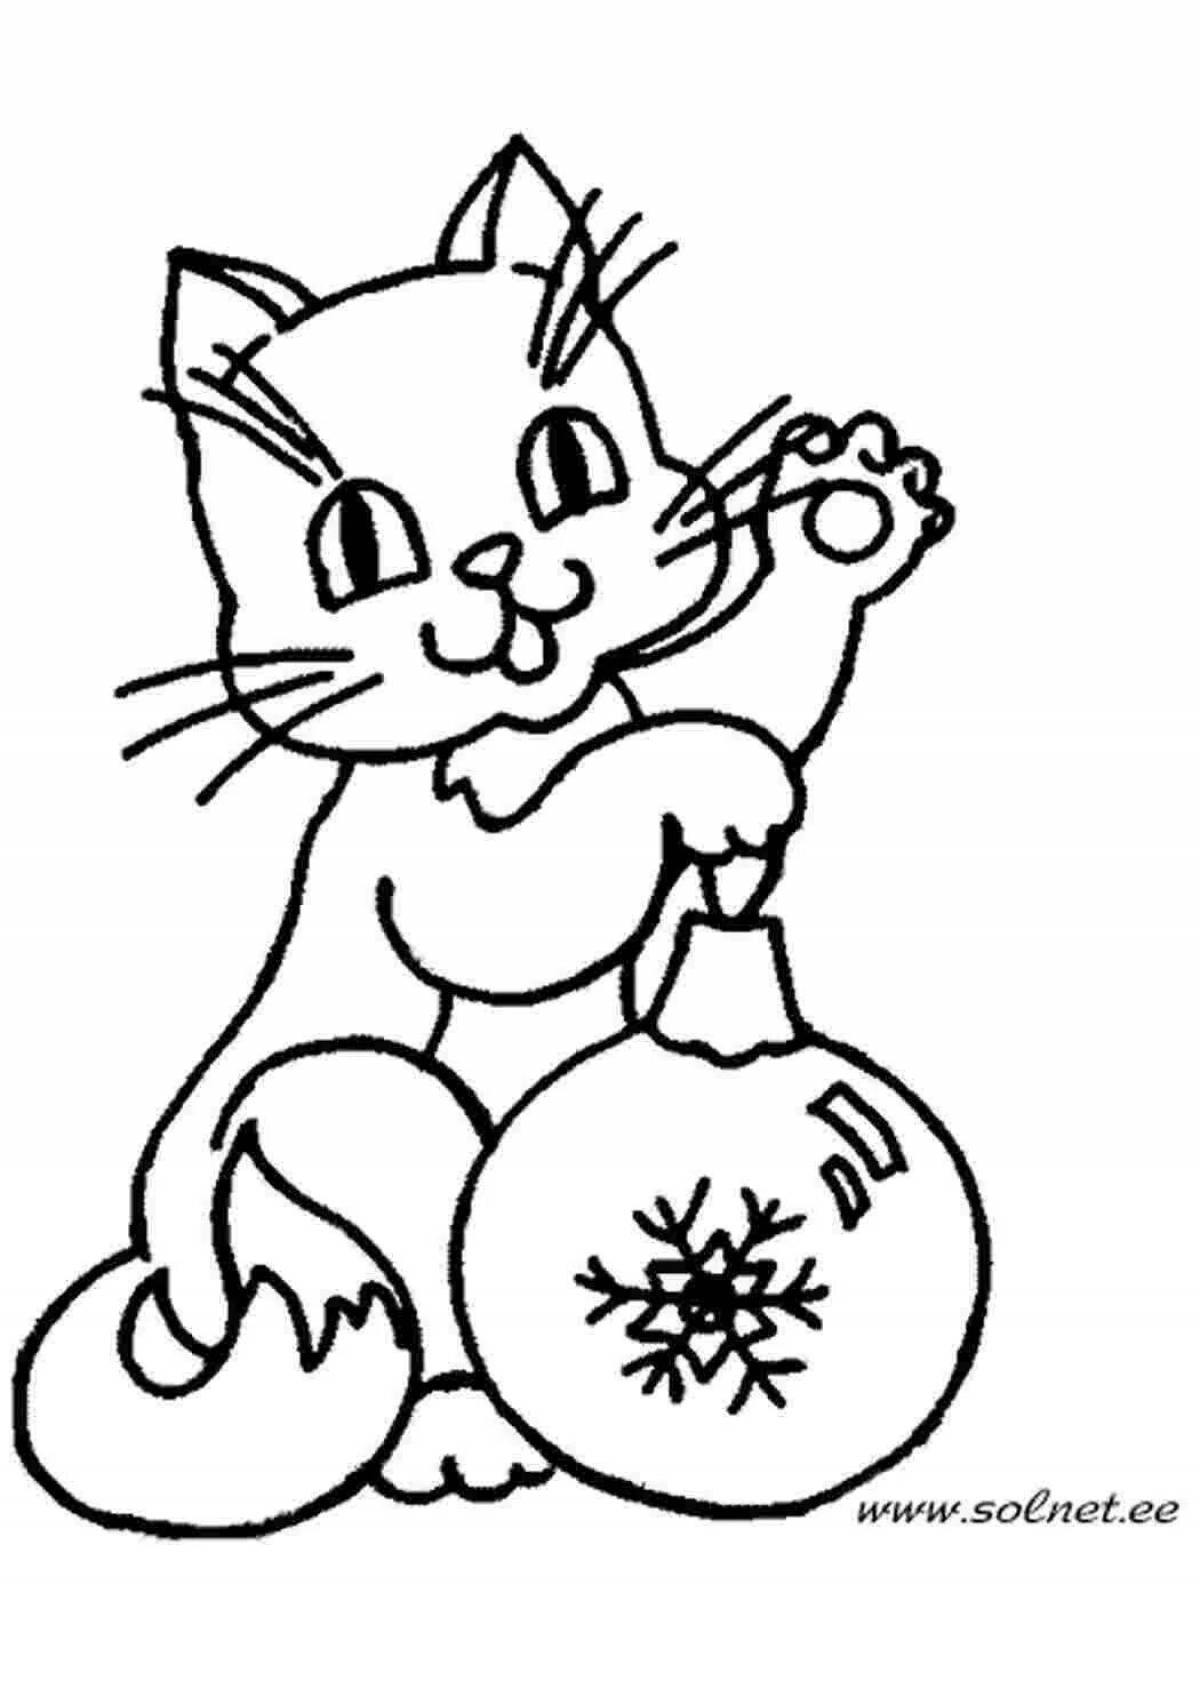 Exciting Christmas cat coloring book